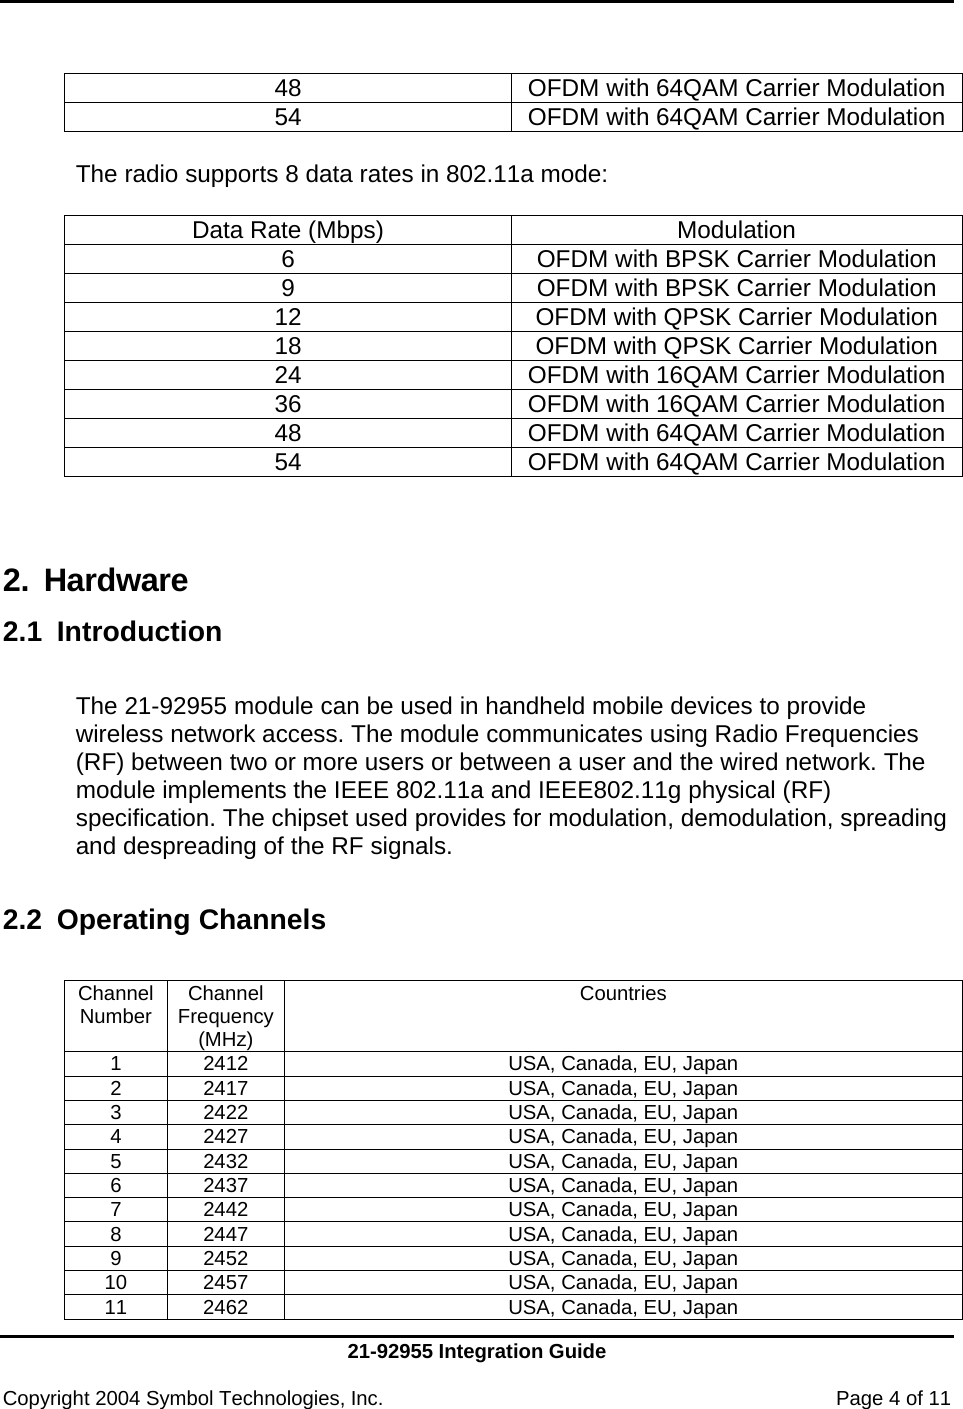     21-92955 Integration Guide  Copyright 2004 Symbol Technologies, Inc.    Page 4 of 11  48  OFDM with 64QAM Carrier Modulation54  OFDM with 64QAM Carrier Modulation The radio supports 8 data rates in 802.11a mode:  Data Rate (Mbps)  Modulation 6  OFDM with BPSK Carrier Modulation 9  OFDM with BPSK Carrier Modulation 12  OFDM with QPSK Carrier Modulation 18  OFDM with QPSK Carrier Modulation 24  OFDM with 16QAM Carrier Modulation36  OFDM with 16QAM Carrier Modulation48  OFDM with 64QAM Carrier Modulation54  OFDM with 64QAM Carrier Modulation  2. Hardware  2.1 Introduction   The 21-92955 module can be used in handheld mobile devices to provide wireless network access. The module communicates using Radio Frequencies (RF) between two or more users or between a user and the wired network. The module implements the IEEE 802.11a and IEEE802.11g physical (RF) specification. The chipset used provides for modulation, demodulation, spreading and despreading of the RF signals.  2.2 Operating Channels  Channel Number  Channel Frequency (MHz) Countries 1  2412  USA, Canada, EU, Japan 2  2417  USA, Canada, EU, Japan 3  2422  USA, Canada, EU, Japan 4  2427  USA, Canada, EU, Japan 5  2432  USA, Canada, EU, Japan 6  2437  USA, Canada, EU, Japan 7  2442  USA, Canada, EU, Japan 8  2447  USA, Canada, EU, Japan 9  2452  USA, Canada, EU, Japan 10  2457  USA, Canada, EU, Japan 11  2462  USA, Canada, EU, Japan 